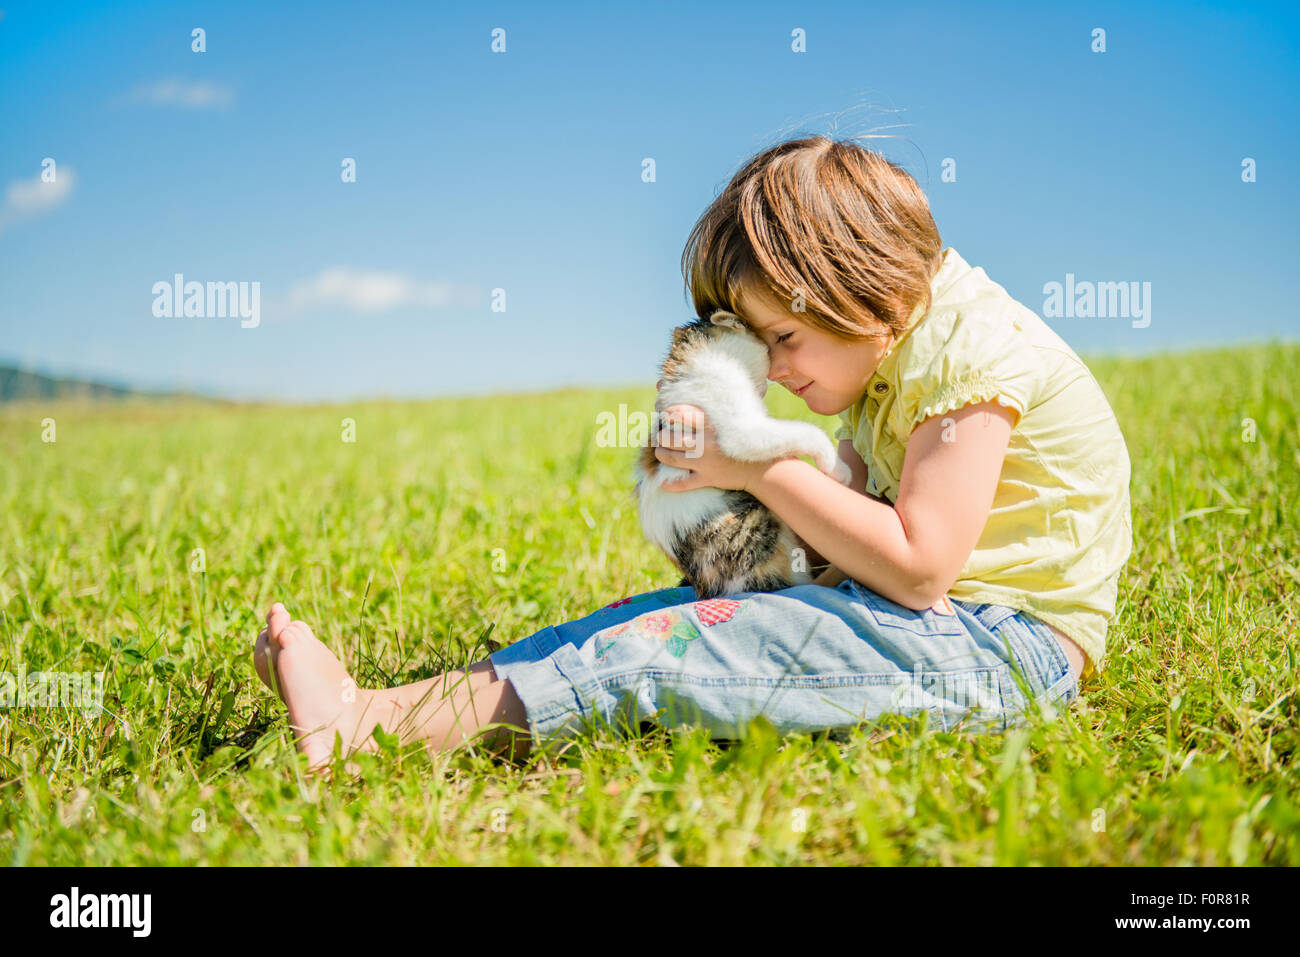 Child sitting in grass and playing with her cute kitten Stock Photo